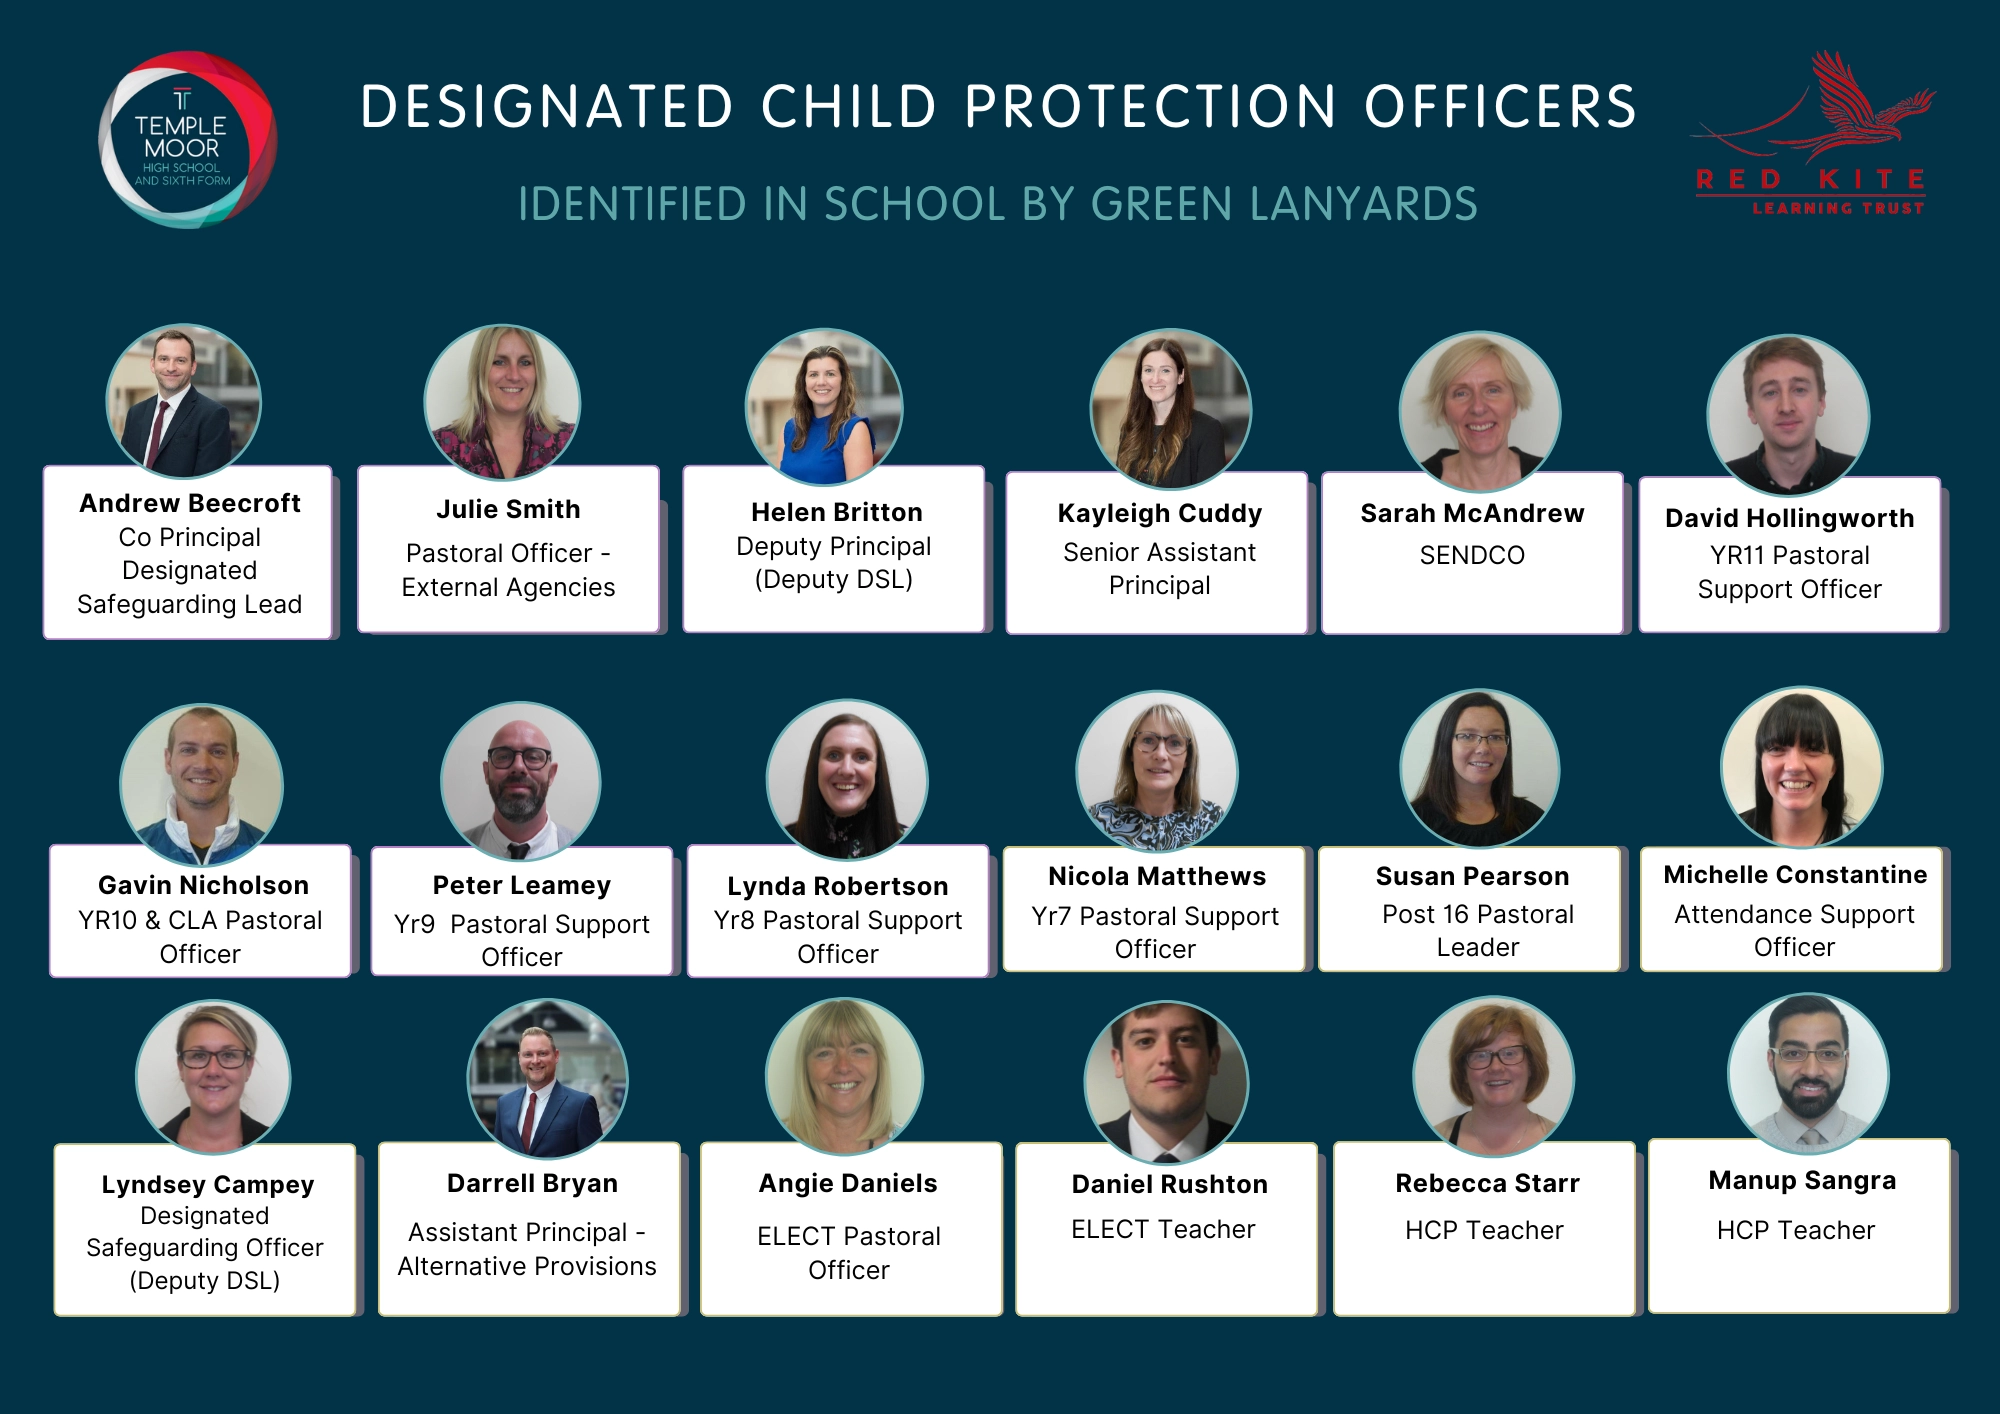 DESIGNATED CHILD PROTECTION OFFICERS (1)